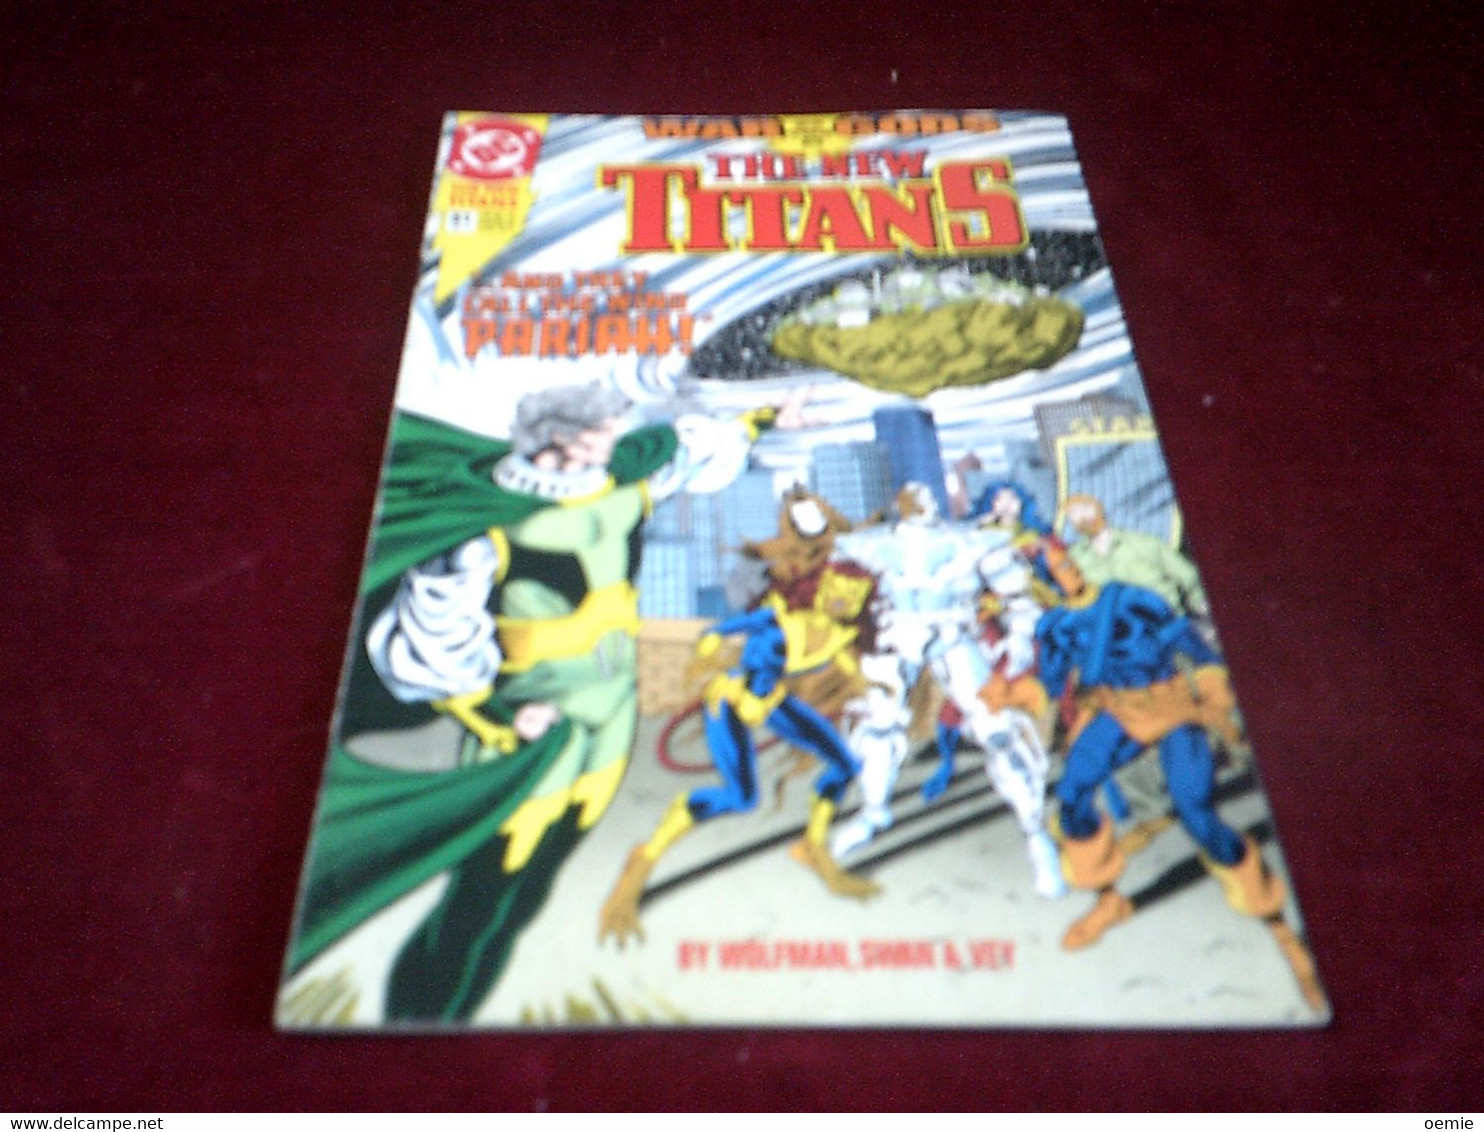 THE NEW TEEN  TITANS   N°  24 OCT   1982 - DC